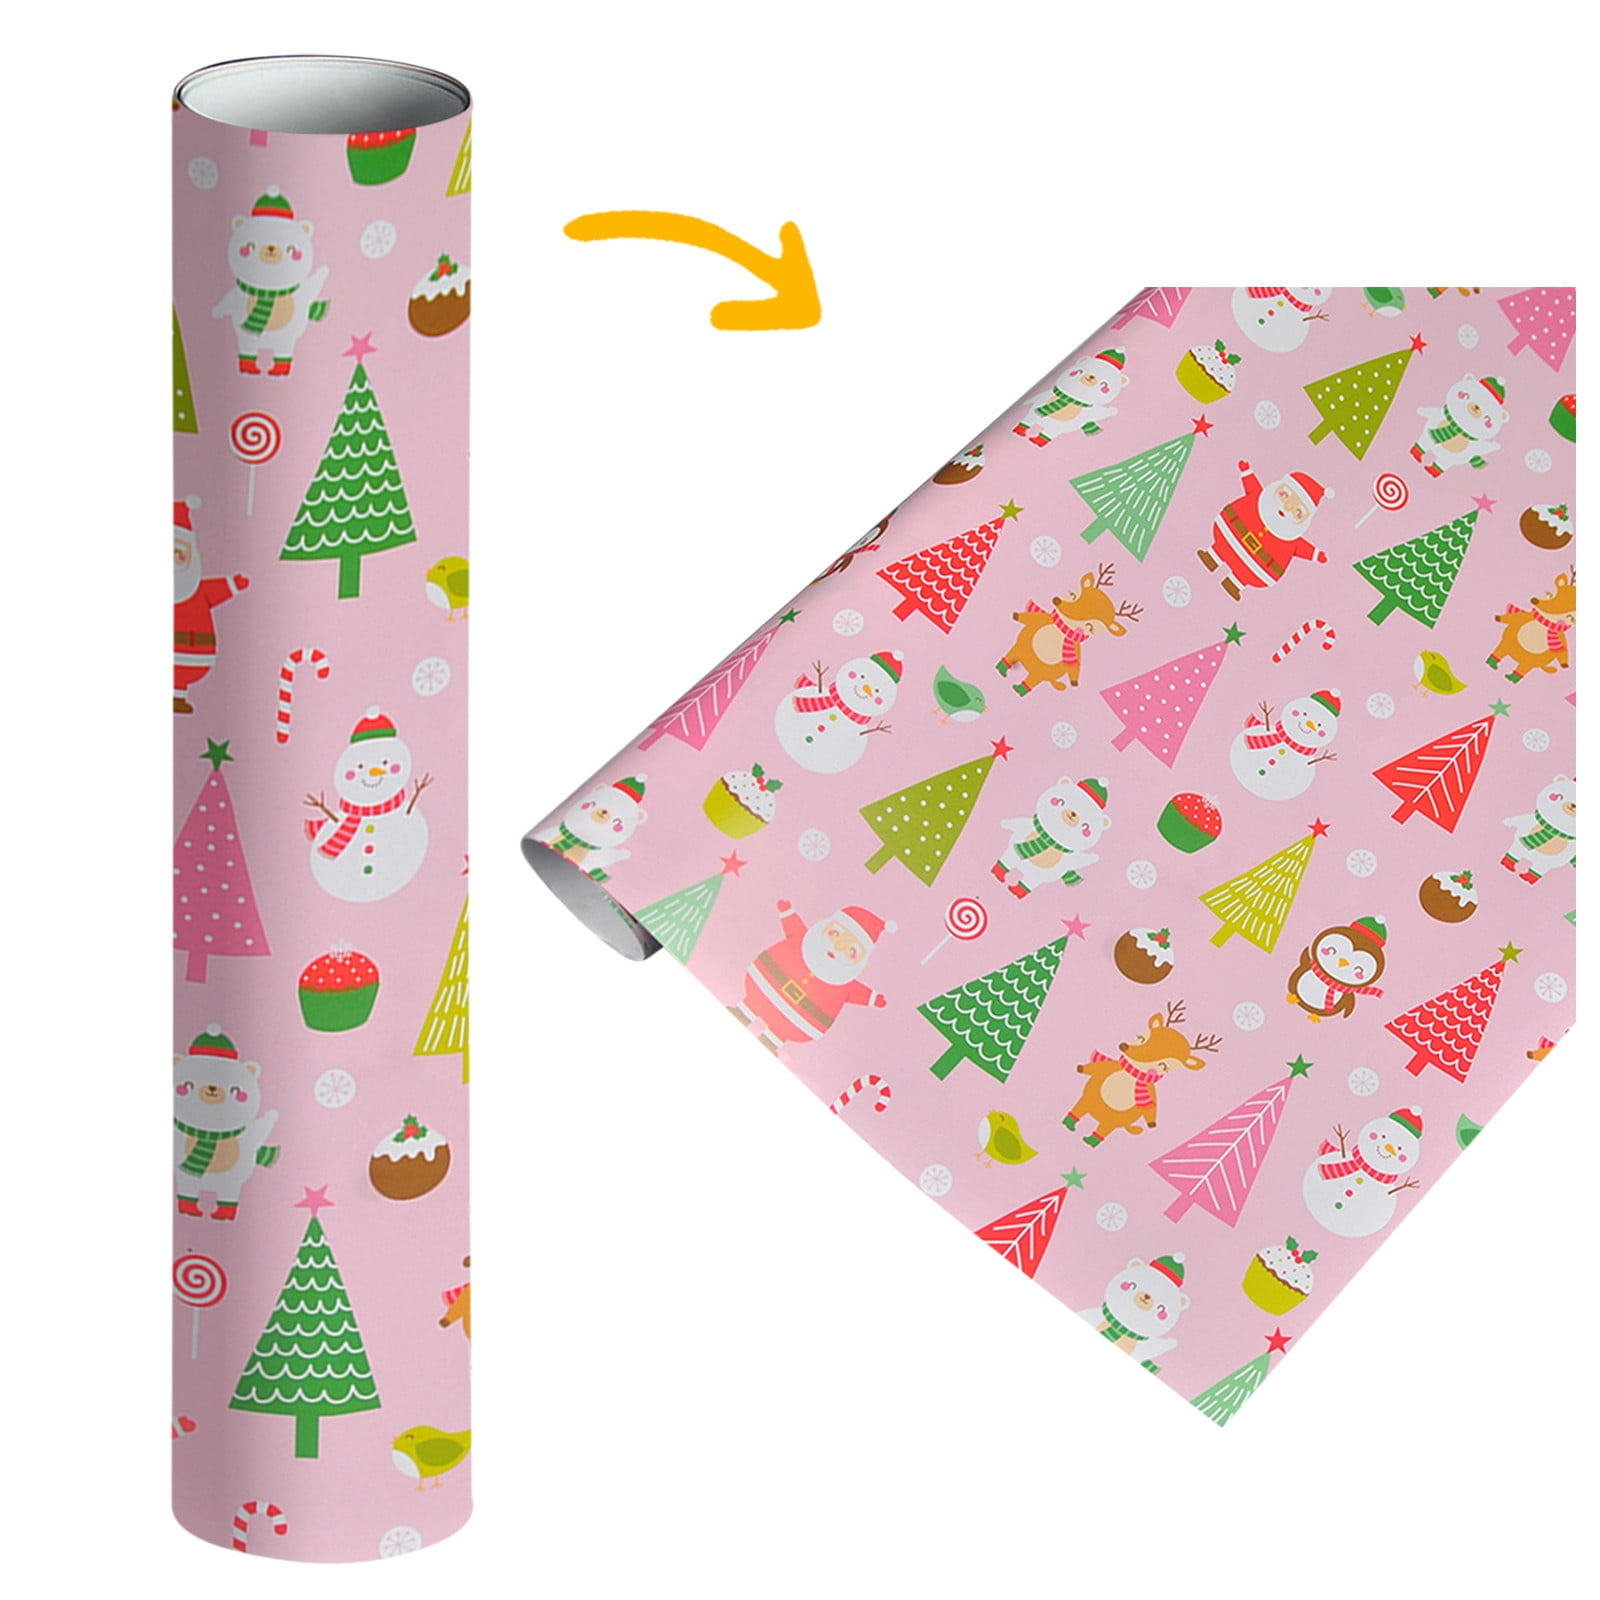 1Pcs New Fashion Design Cloth Flower Wrapping Paper